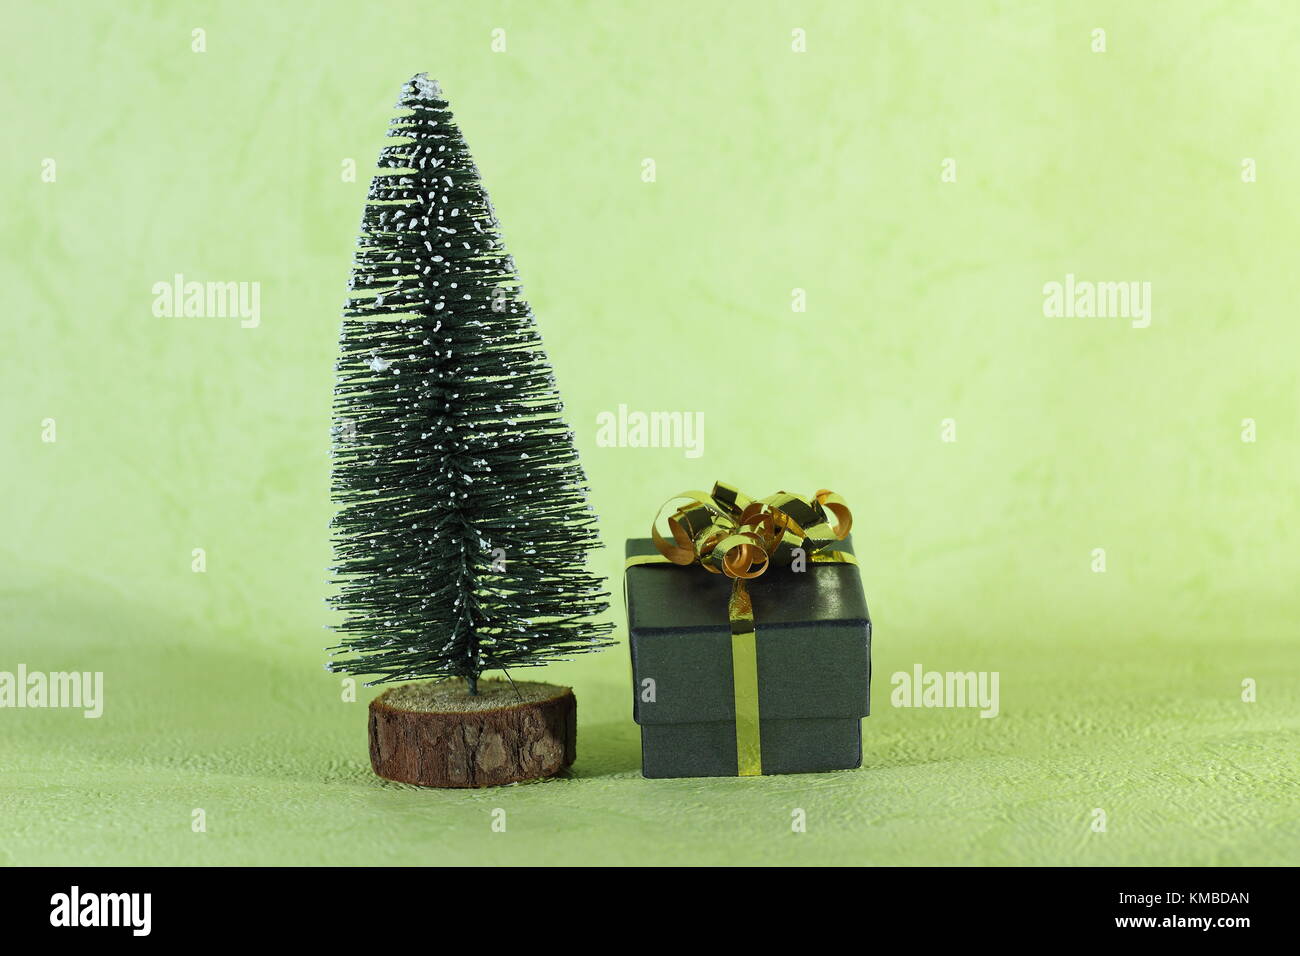 a small gift placed next to a Christmas tree decorative and miniature on green background Stock Photo